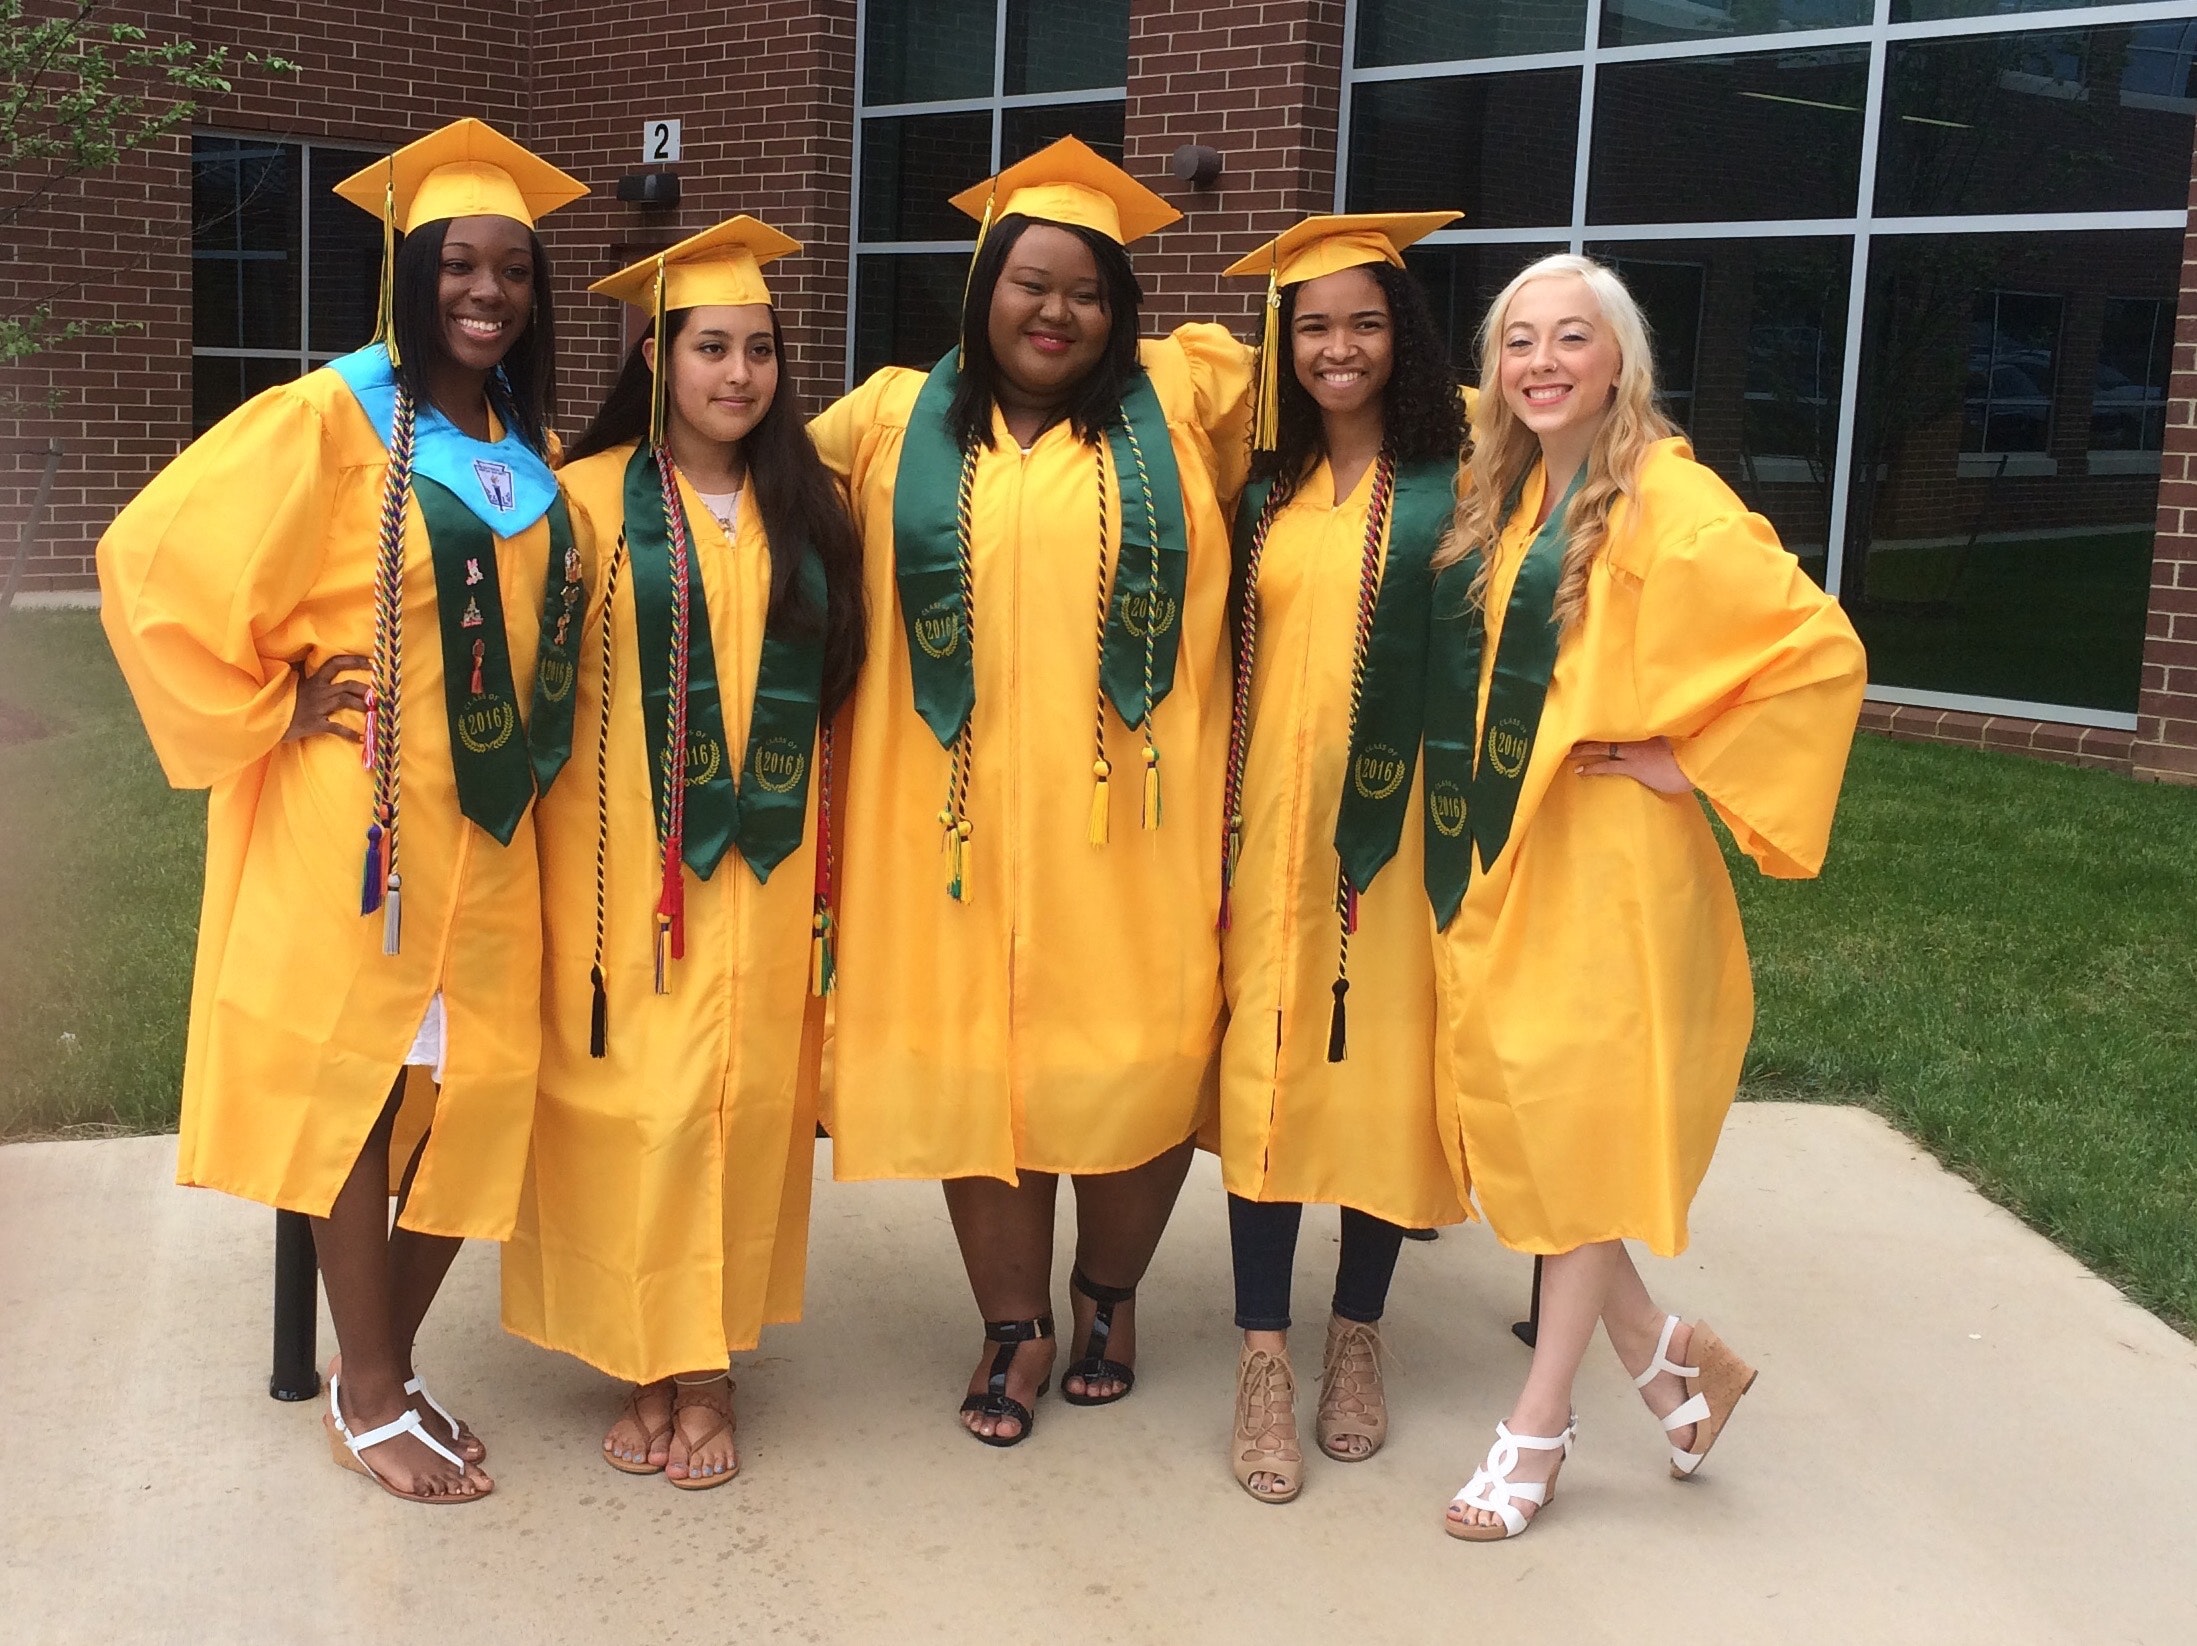 Five friends from the same sorority posing in graduation gowns.